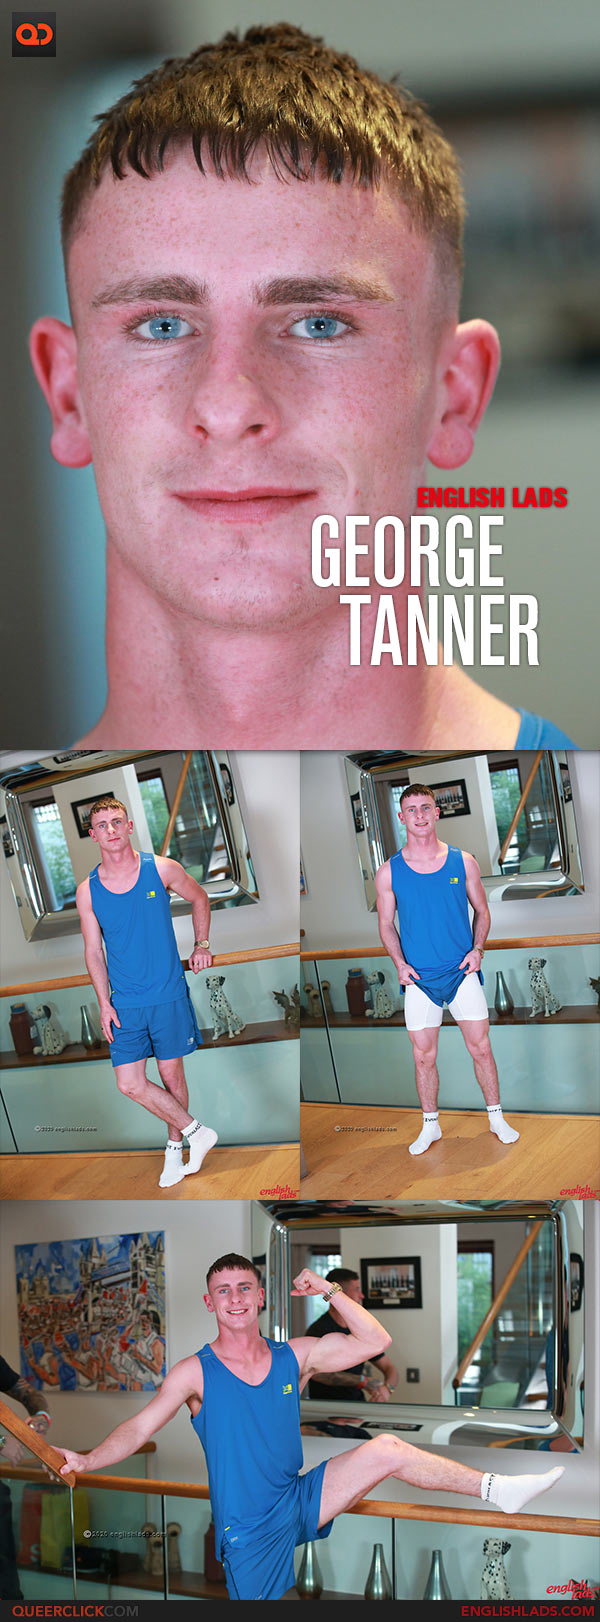 English Lads: Young Footballer George Tanner with Amazing Blue Eyes and Ripped Body Shows us his Uncut Cock